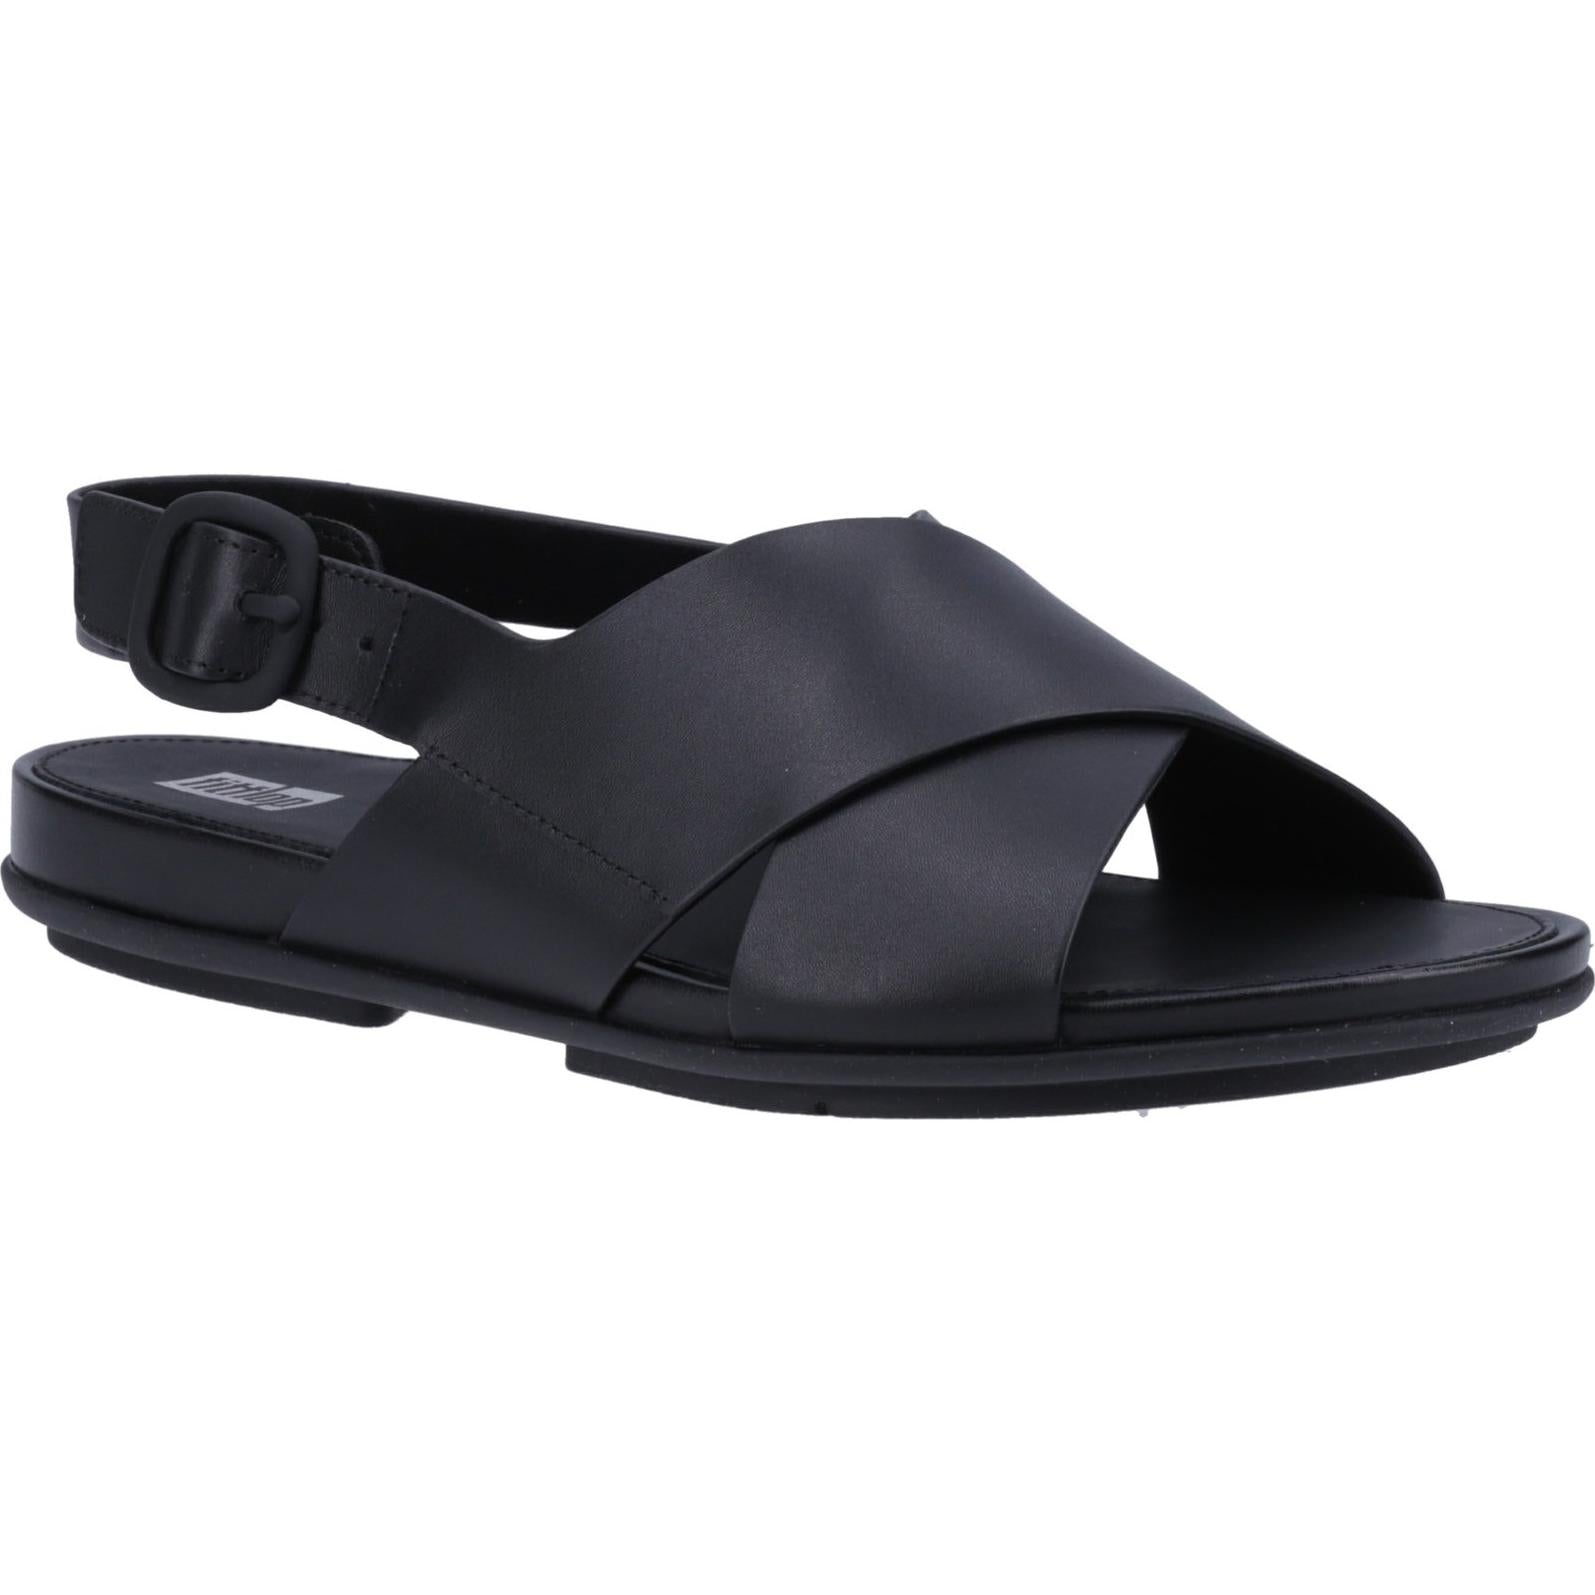 Fitflop Gracie Sandals